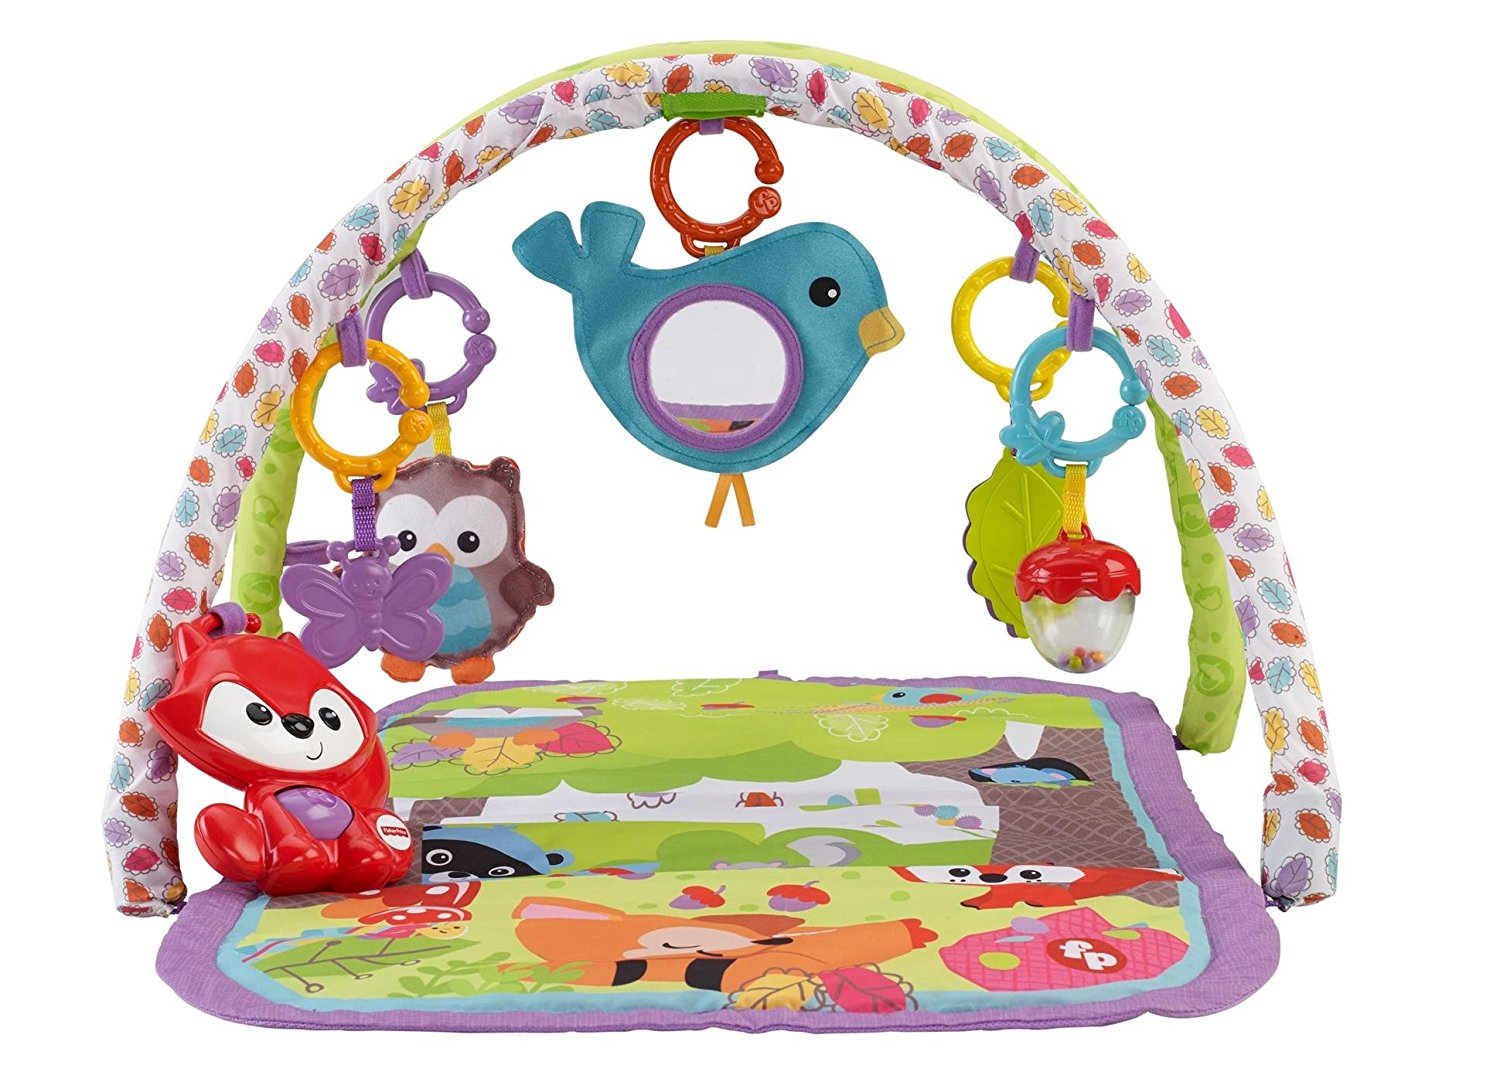 Fisher-Price 3-in-1 Musical Activity Gym – Just $18.89!